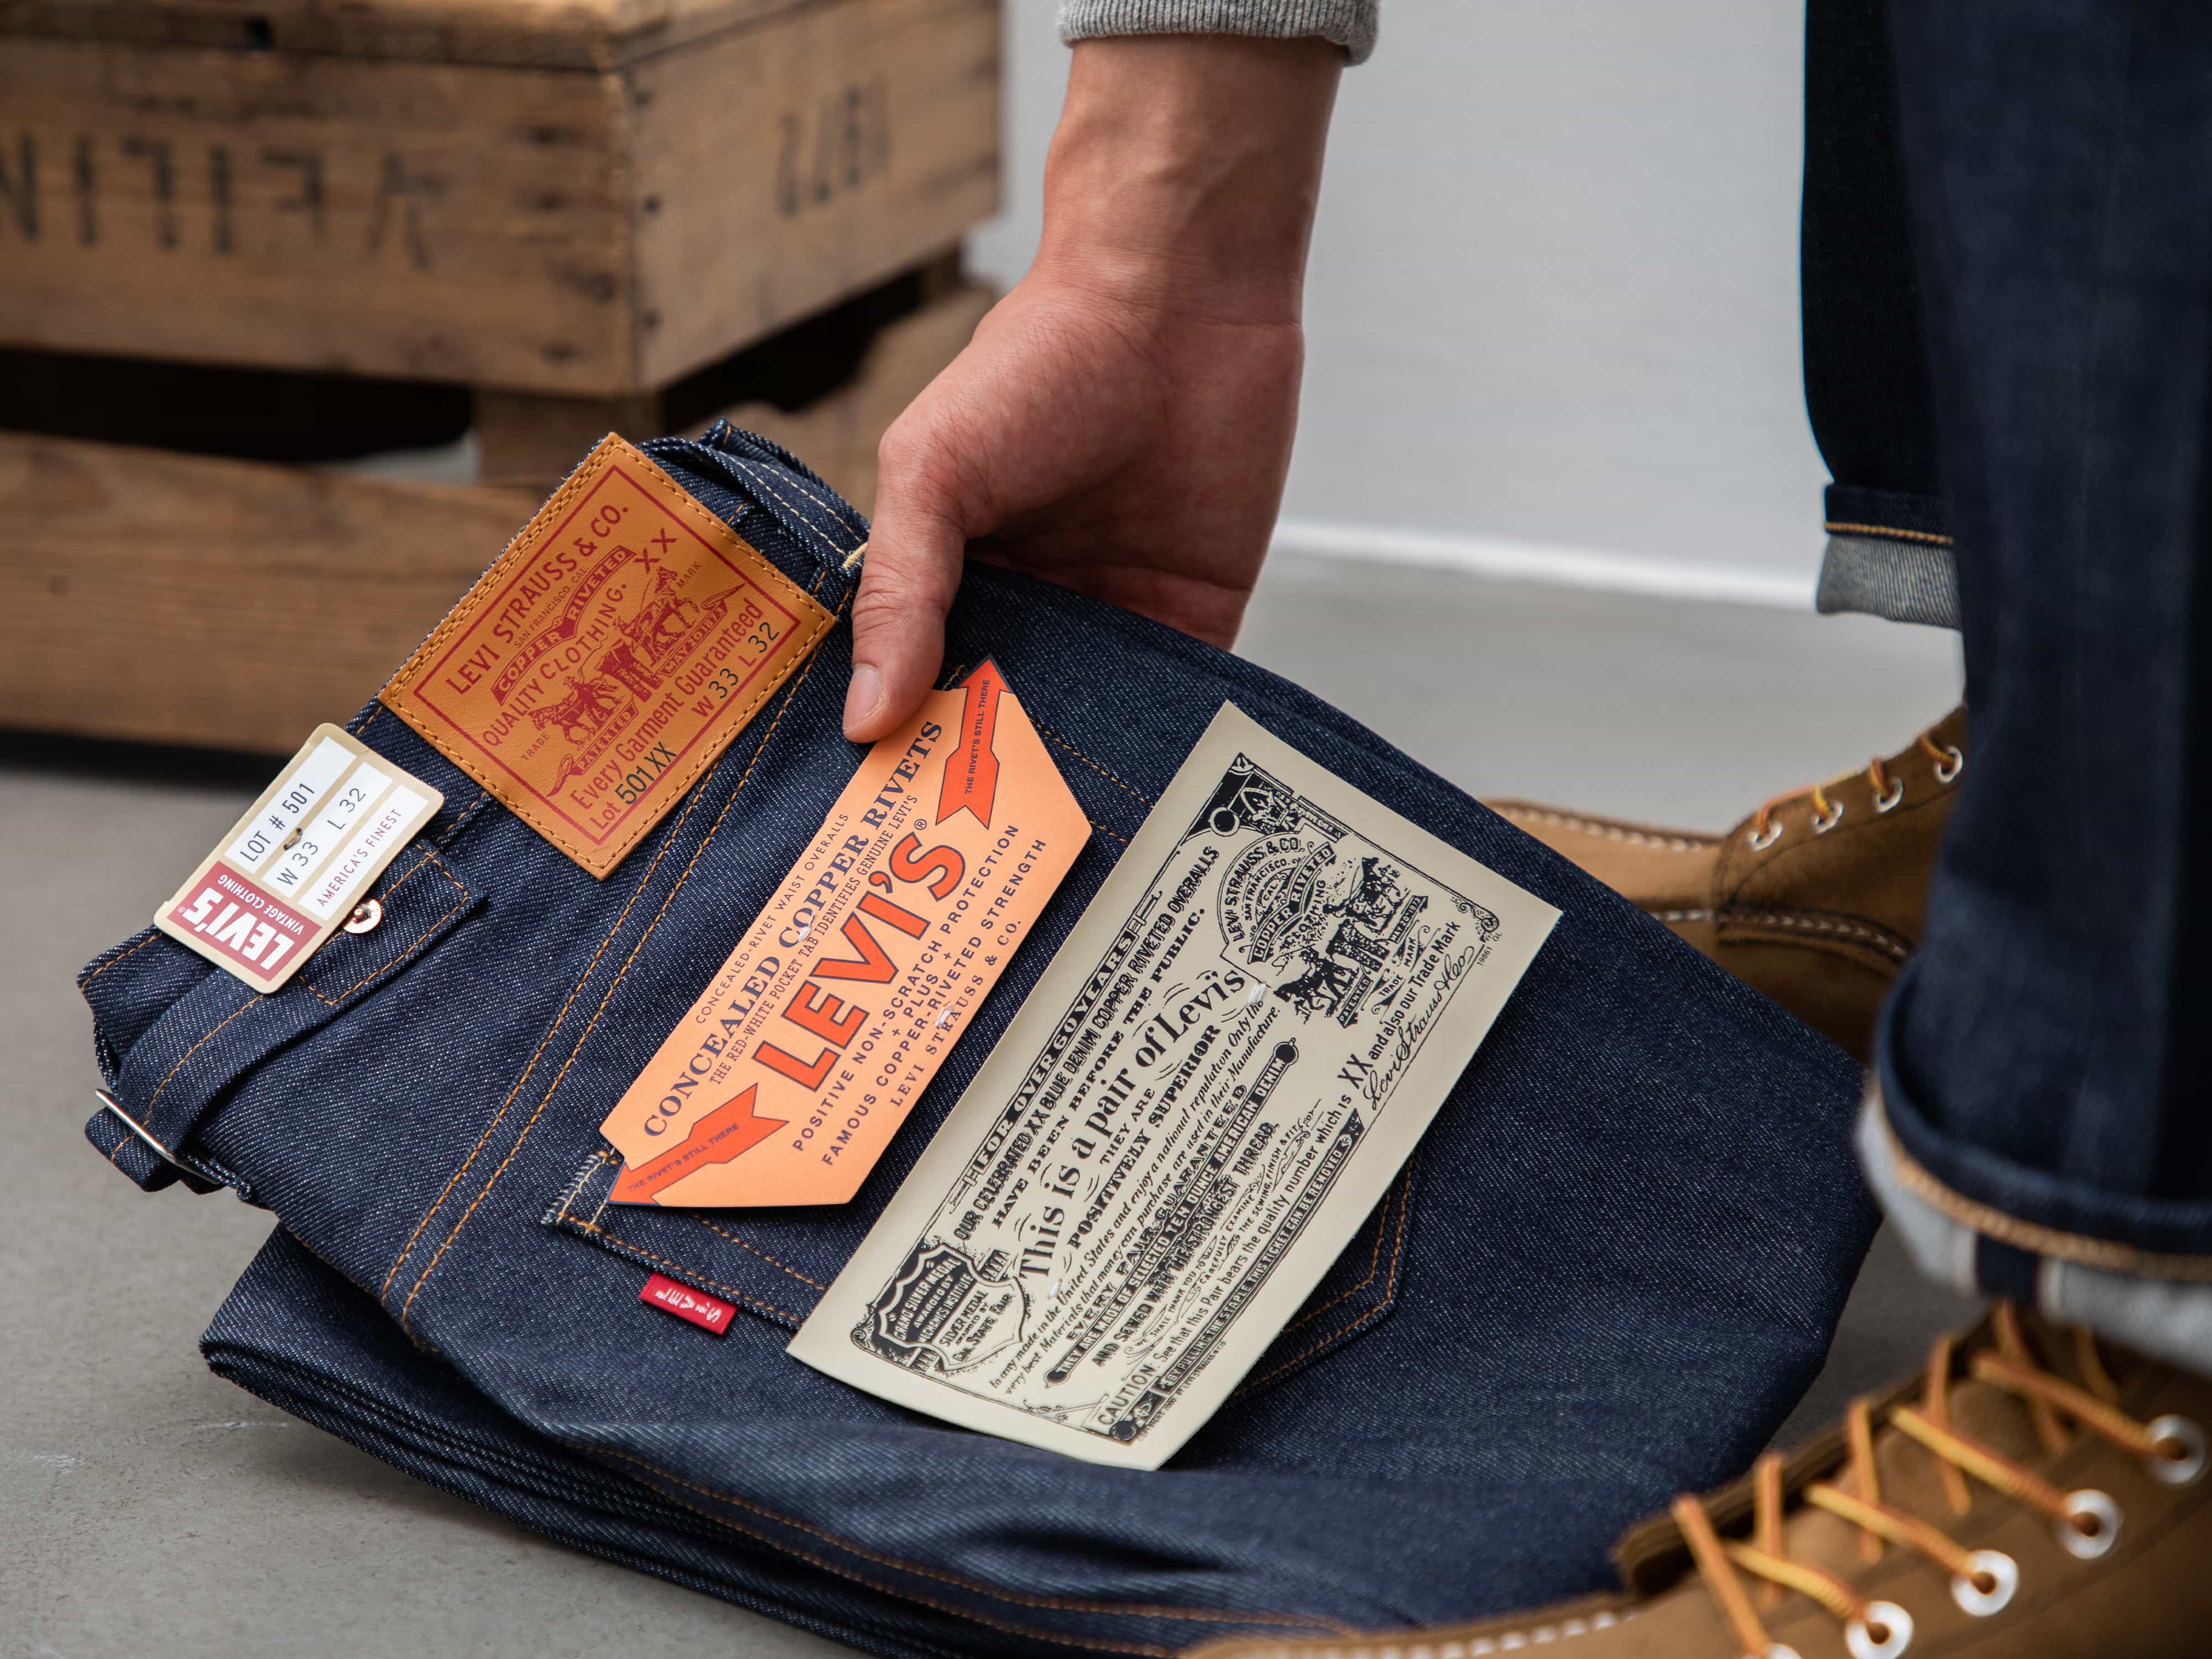 Play ball! The inspiration for our latest Levi's Vintage Clothing collection  comes from our own int…